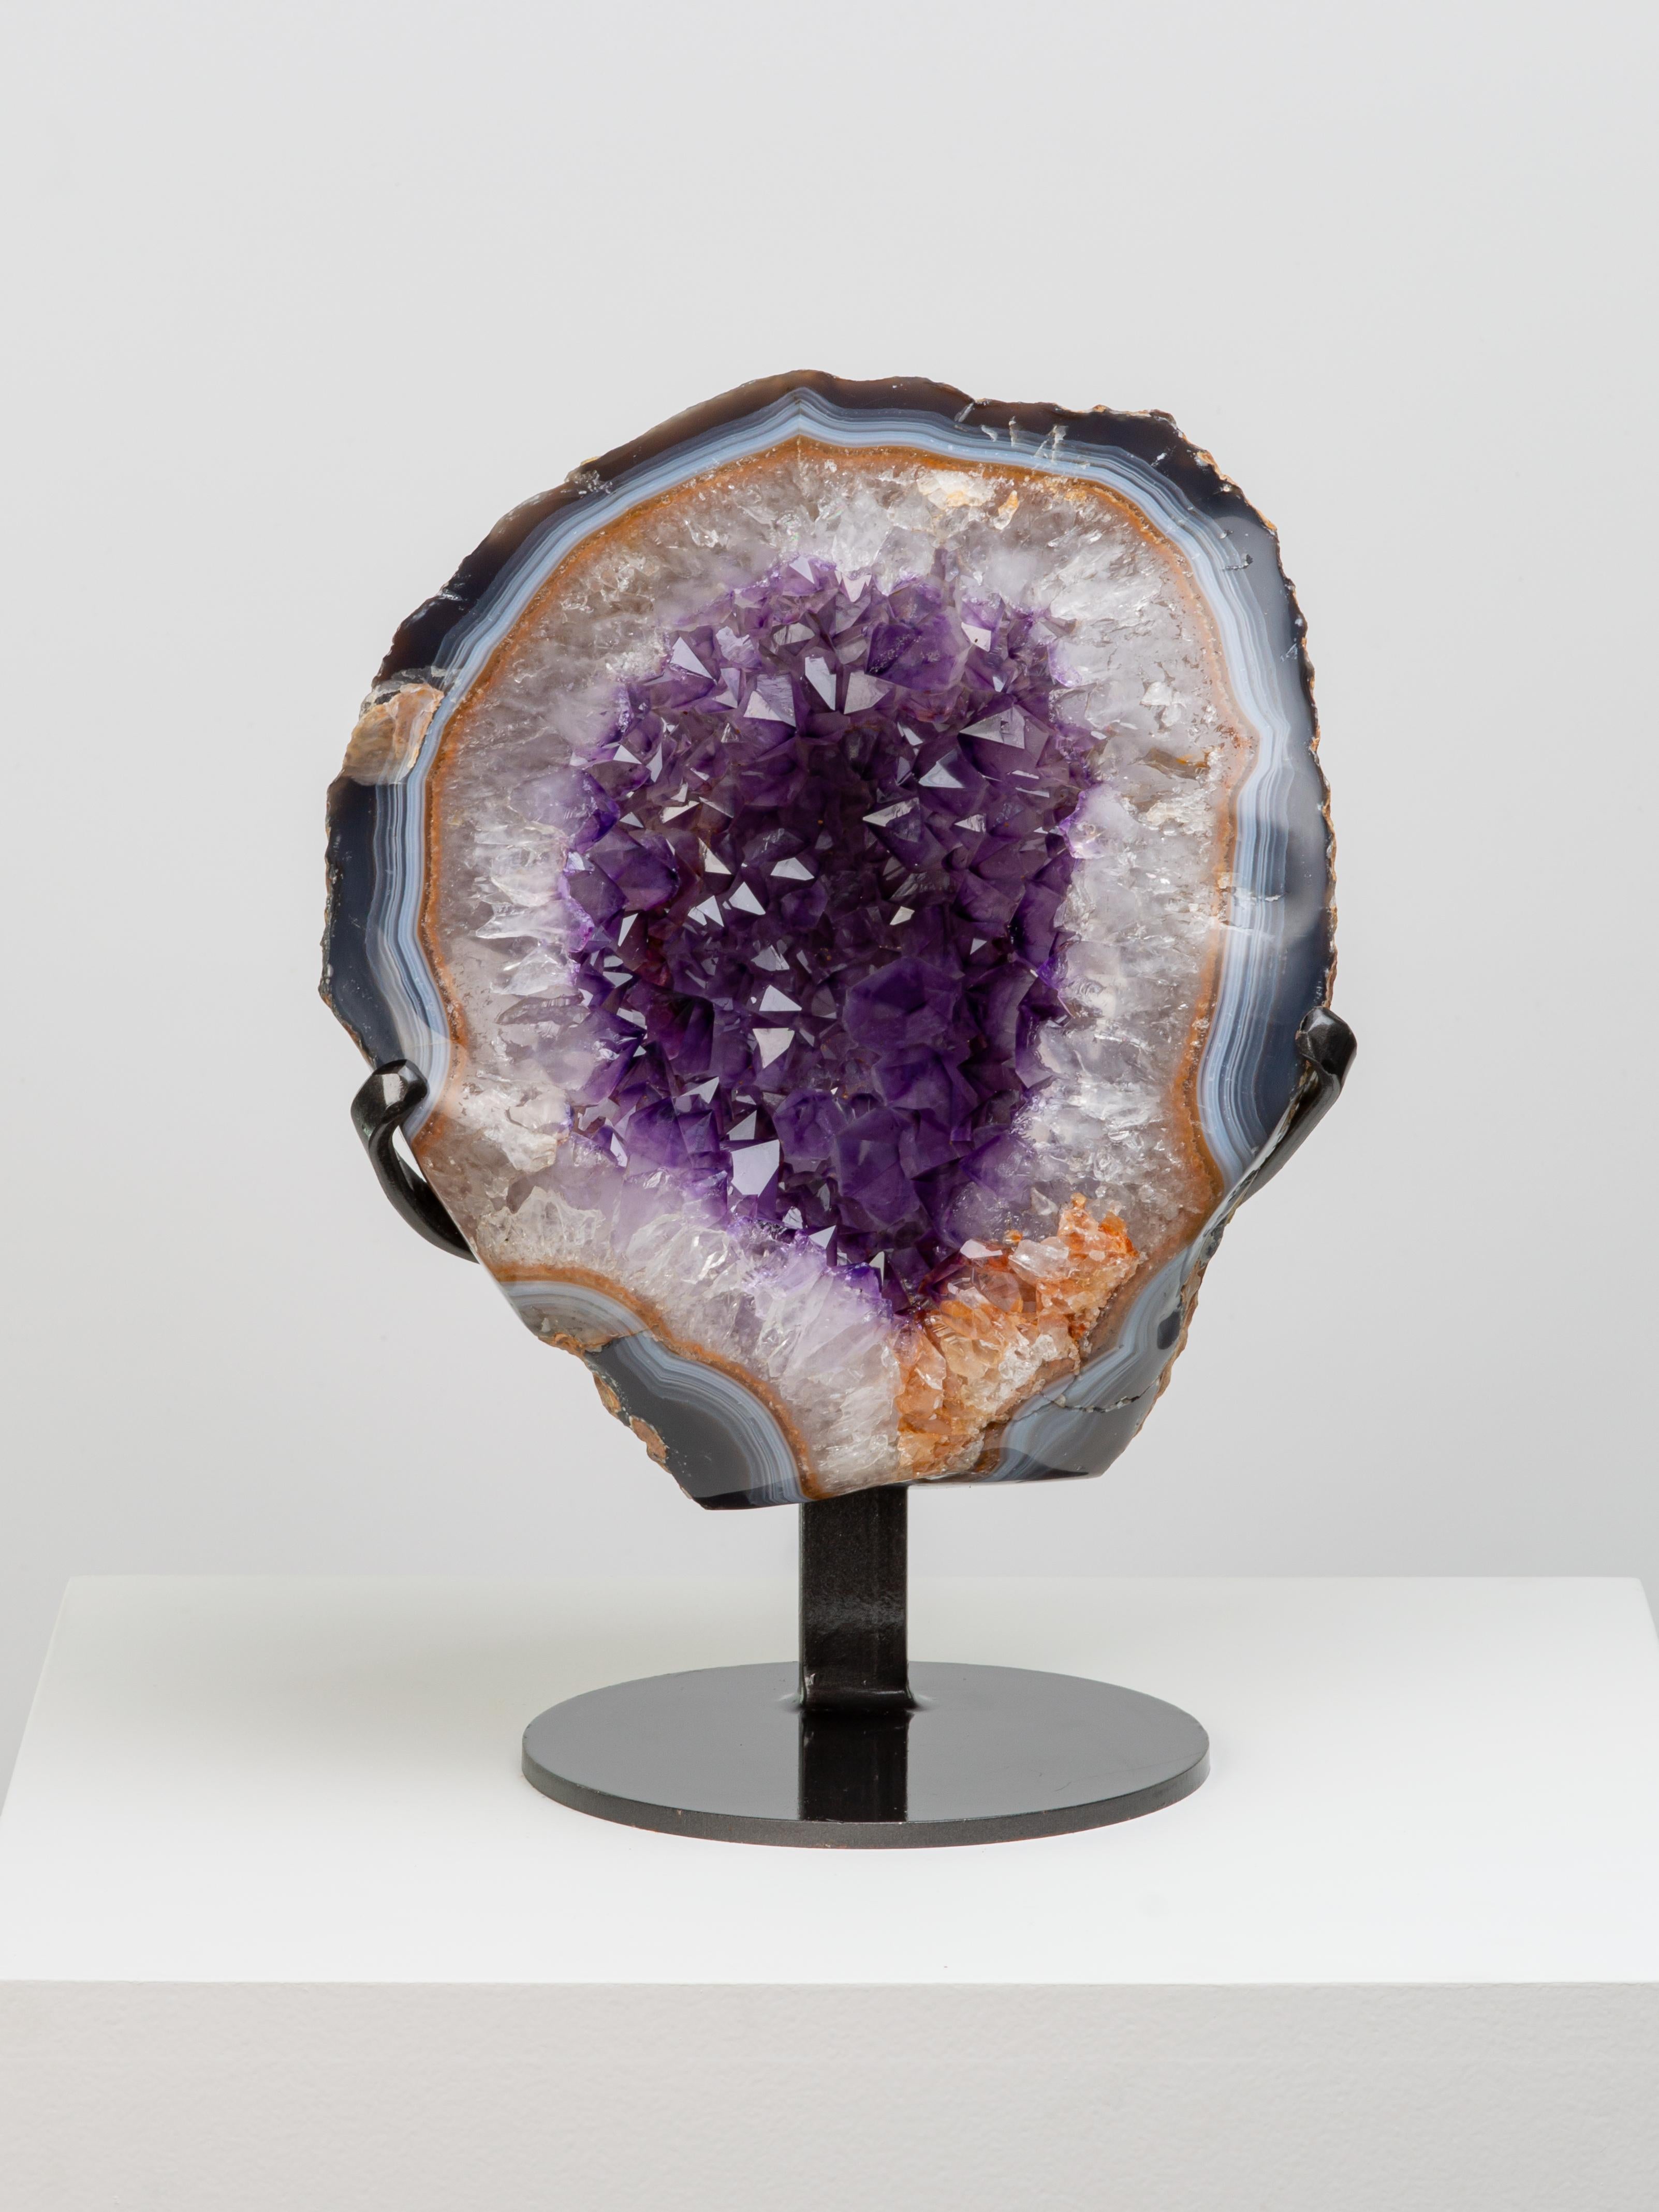 This beautiful half geode has a wonderful blue-brown banded agate border
with a thick base of white quartz differentiating to deep amethyst at the tips. 
A small section of orange quartz crystals can be admired at the bottom right.

This piece